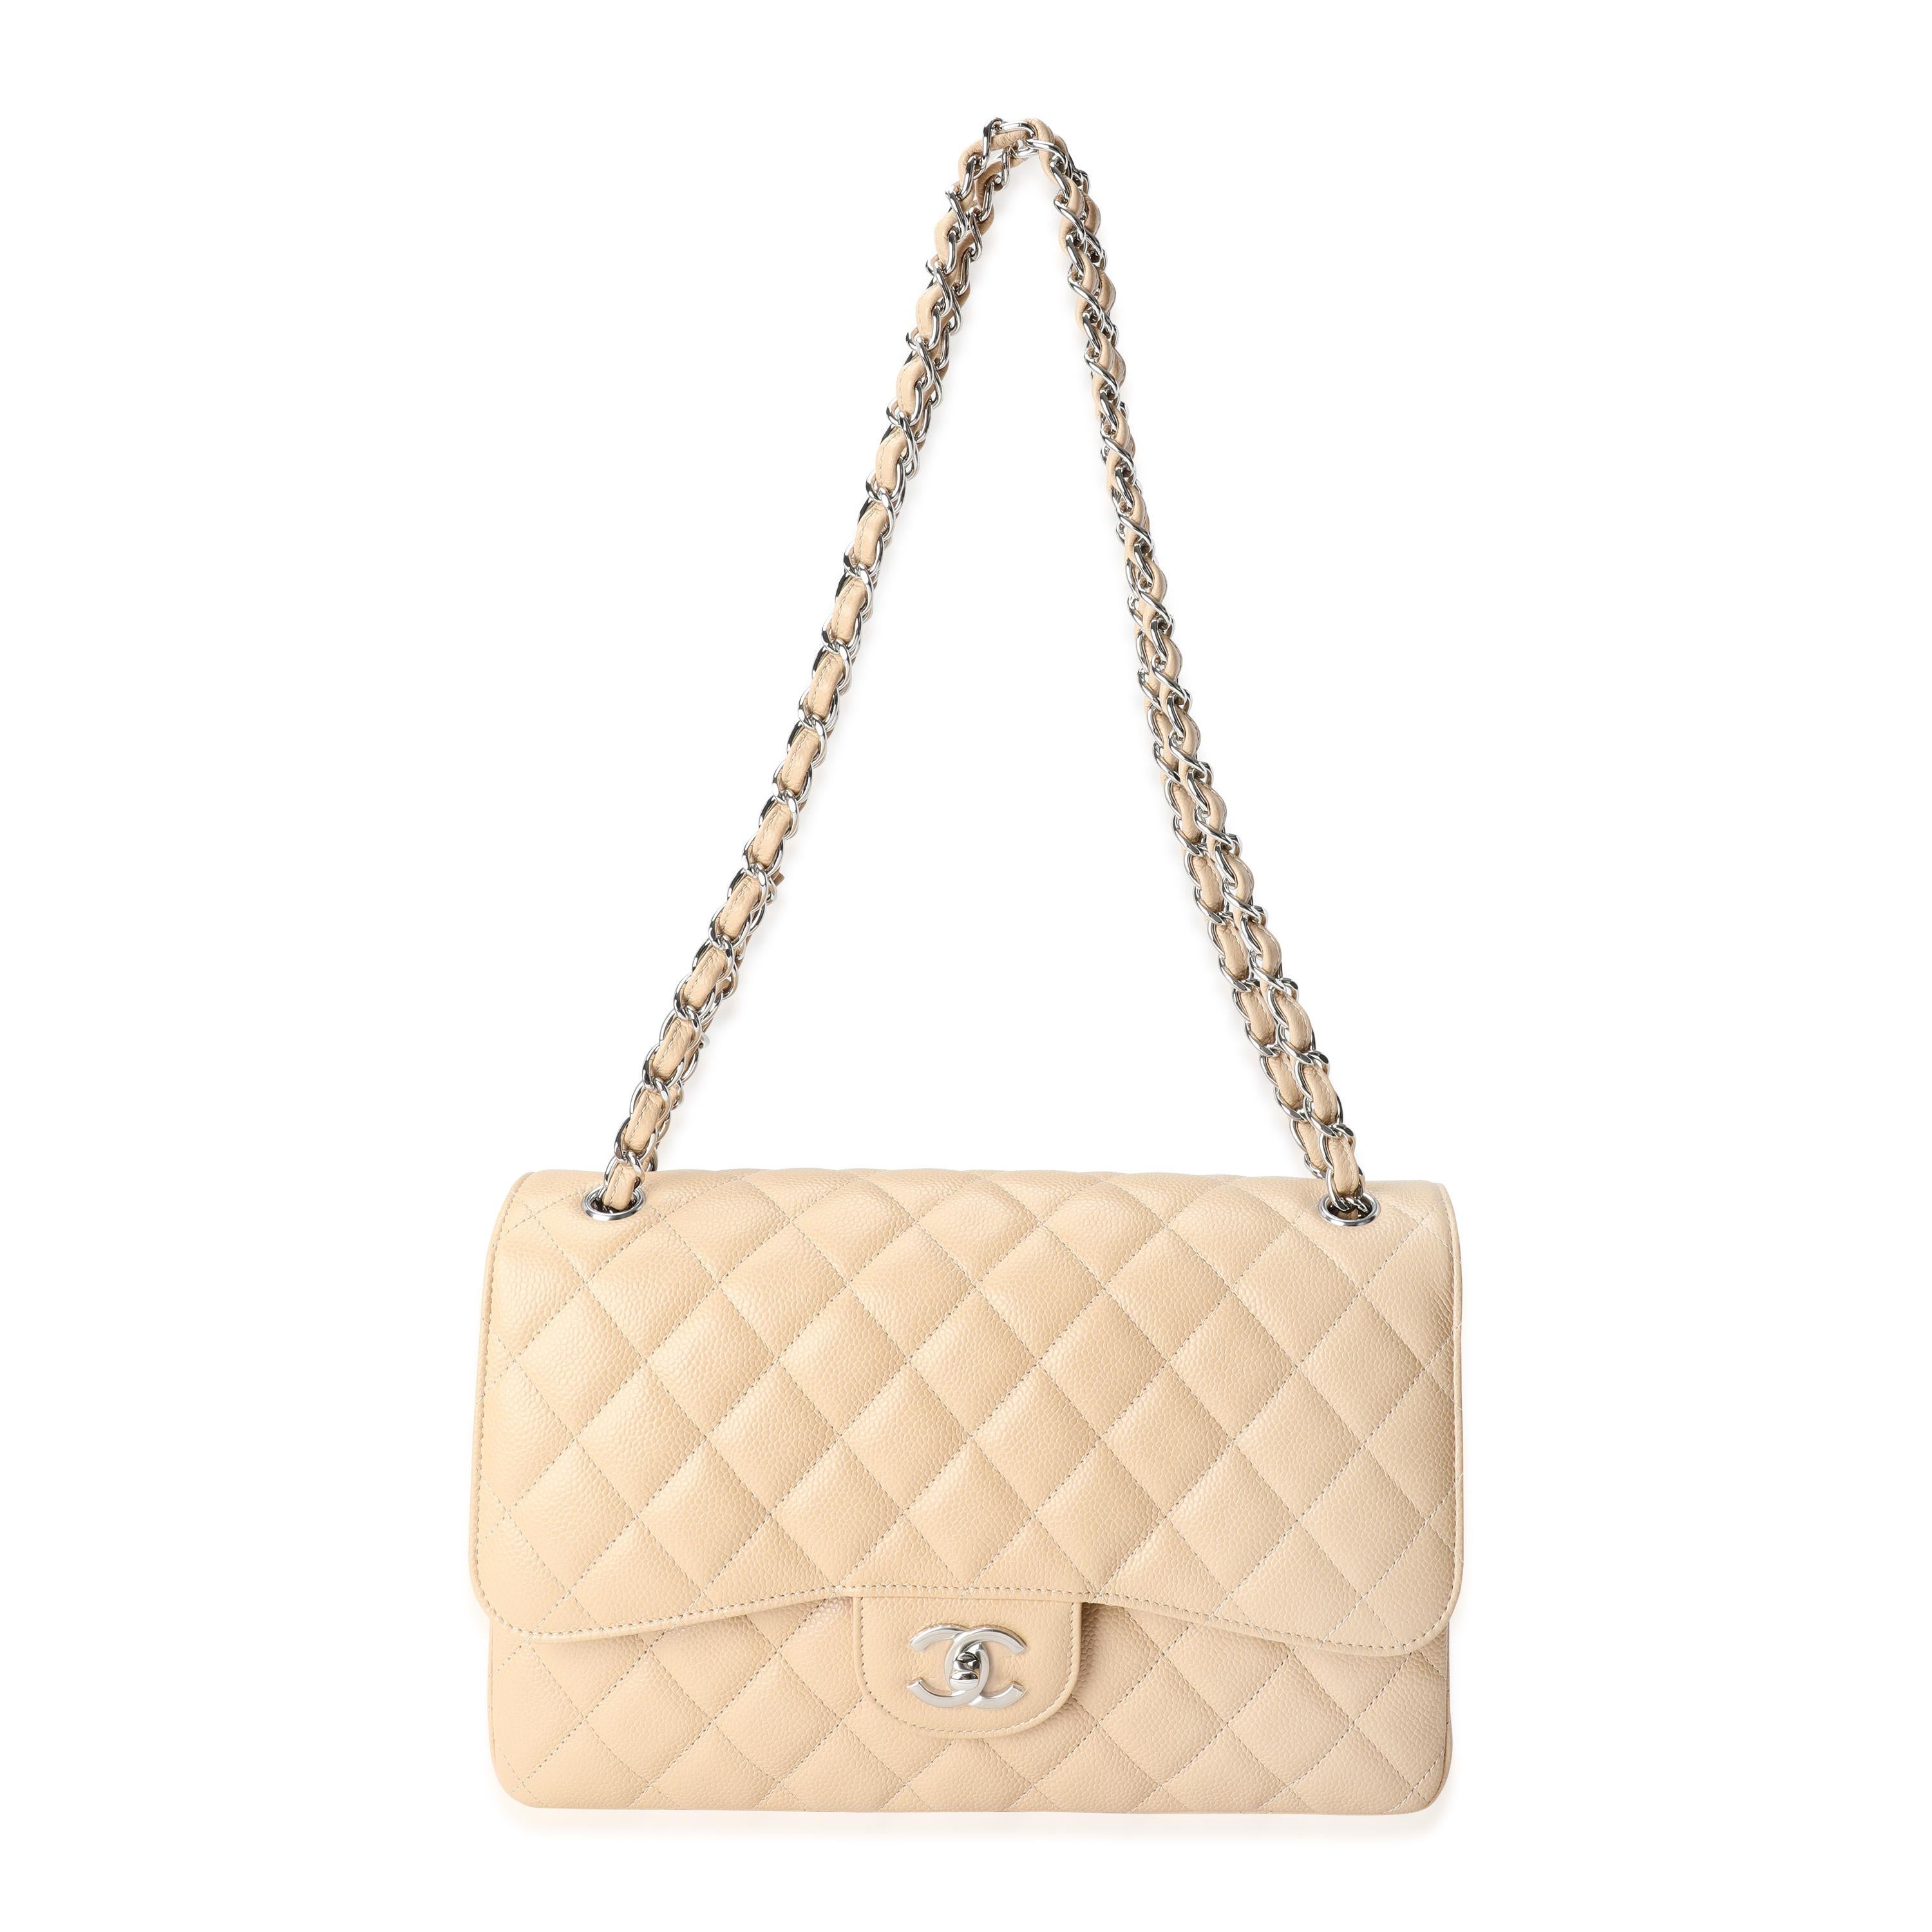 Listing Title: Chanel Beige Quilted Caviar Jumbo Classic Double Flap Bag
SKU: 117389
MSRP: 9500.00

Handbag Condition: Excellent
Condition Comments: Excellent Condition. Plastic on some hardware. No visible signs of wear.
Brand: Chanel
Model: